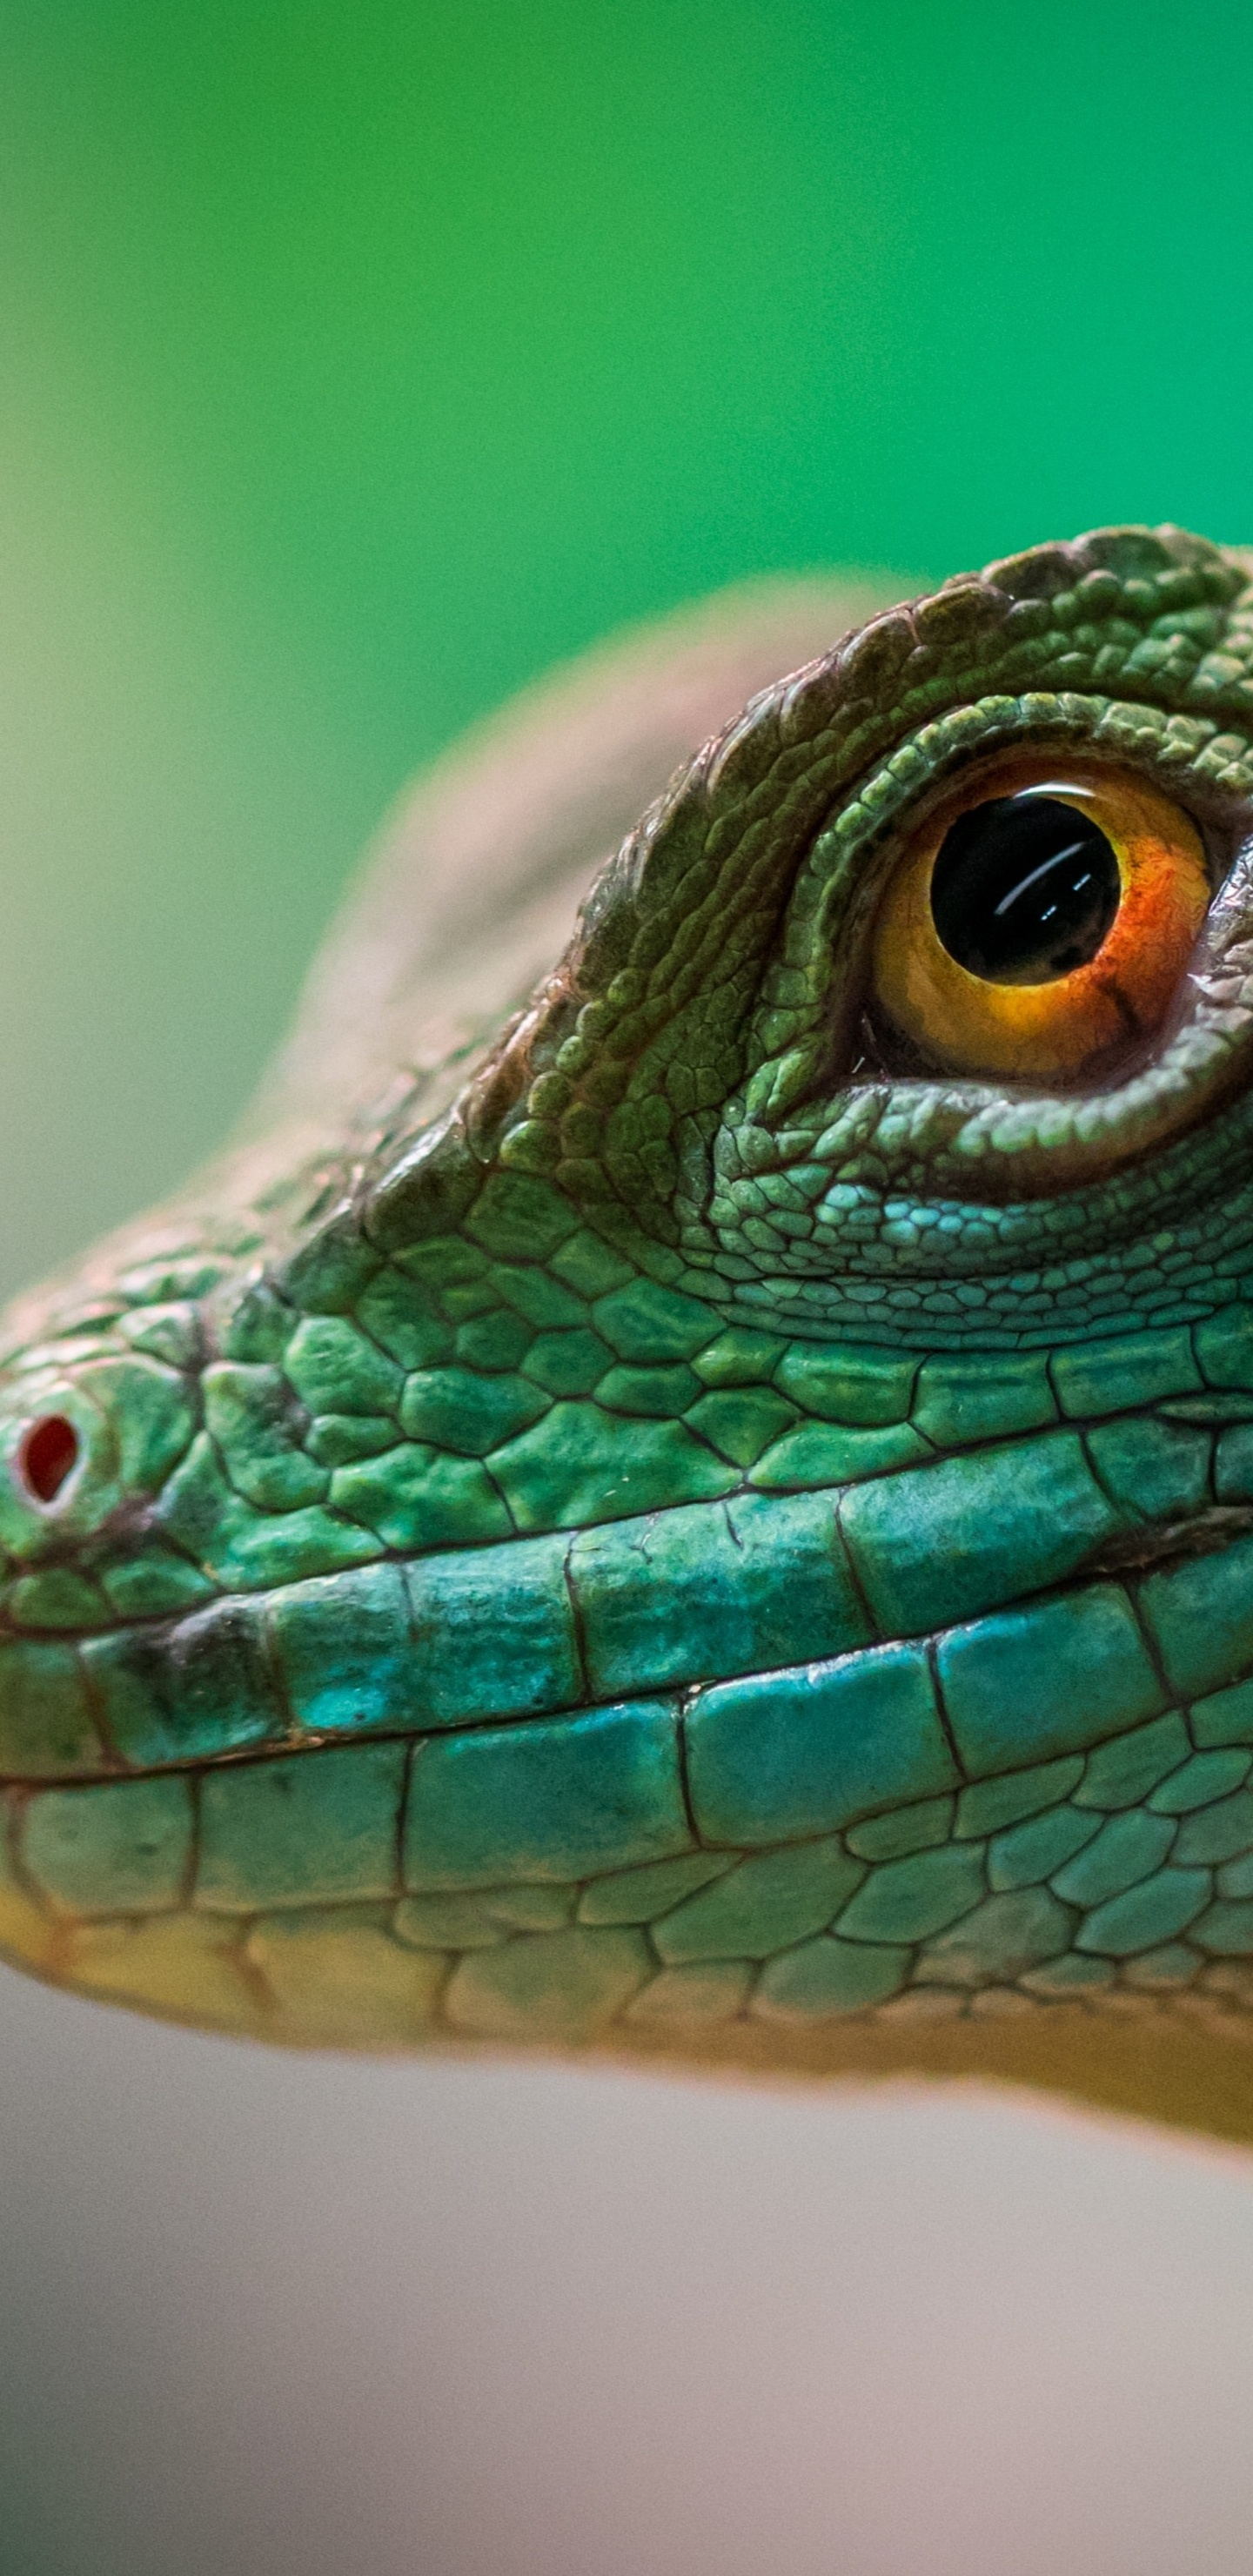 1440x2960 Green Lizard Reptile Macro 4k Samsung Galaxy Note 9,8, S9,S8,S8+ QHD HD 4k Wallpapers, Images, Backgrounds, Photos and Pictures